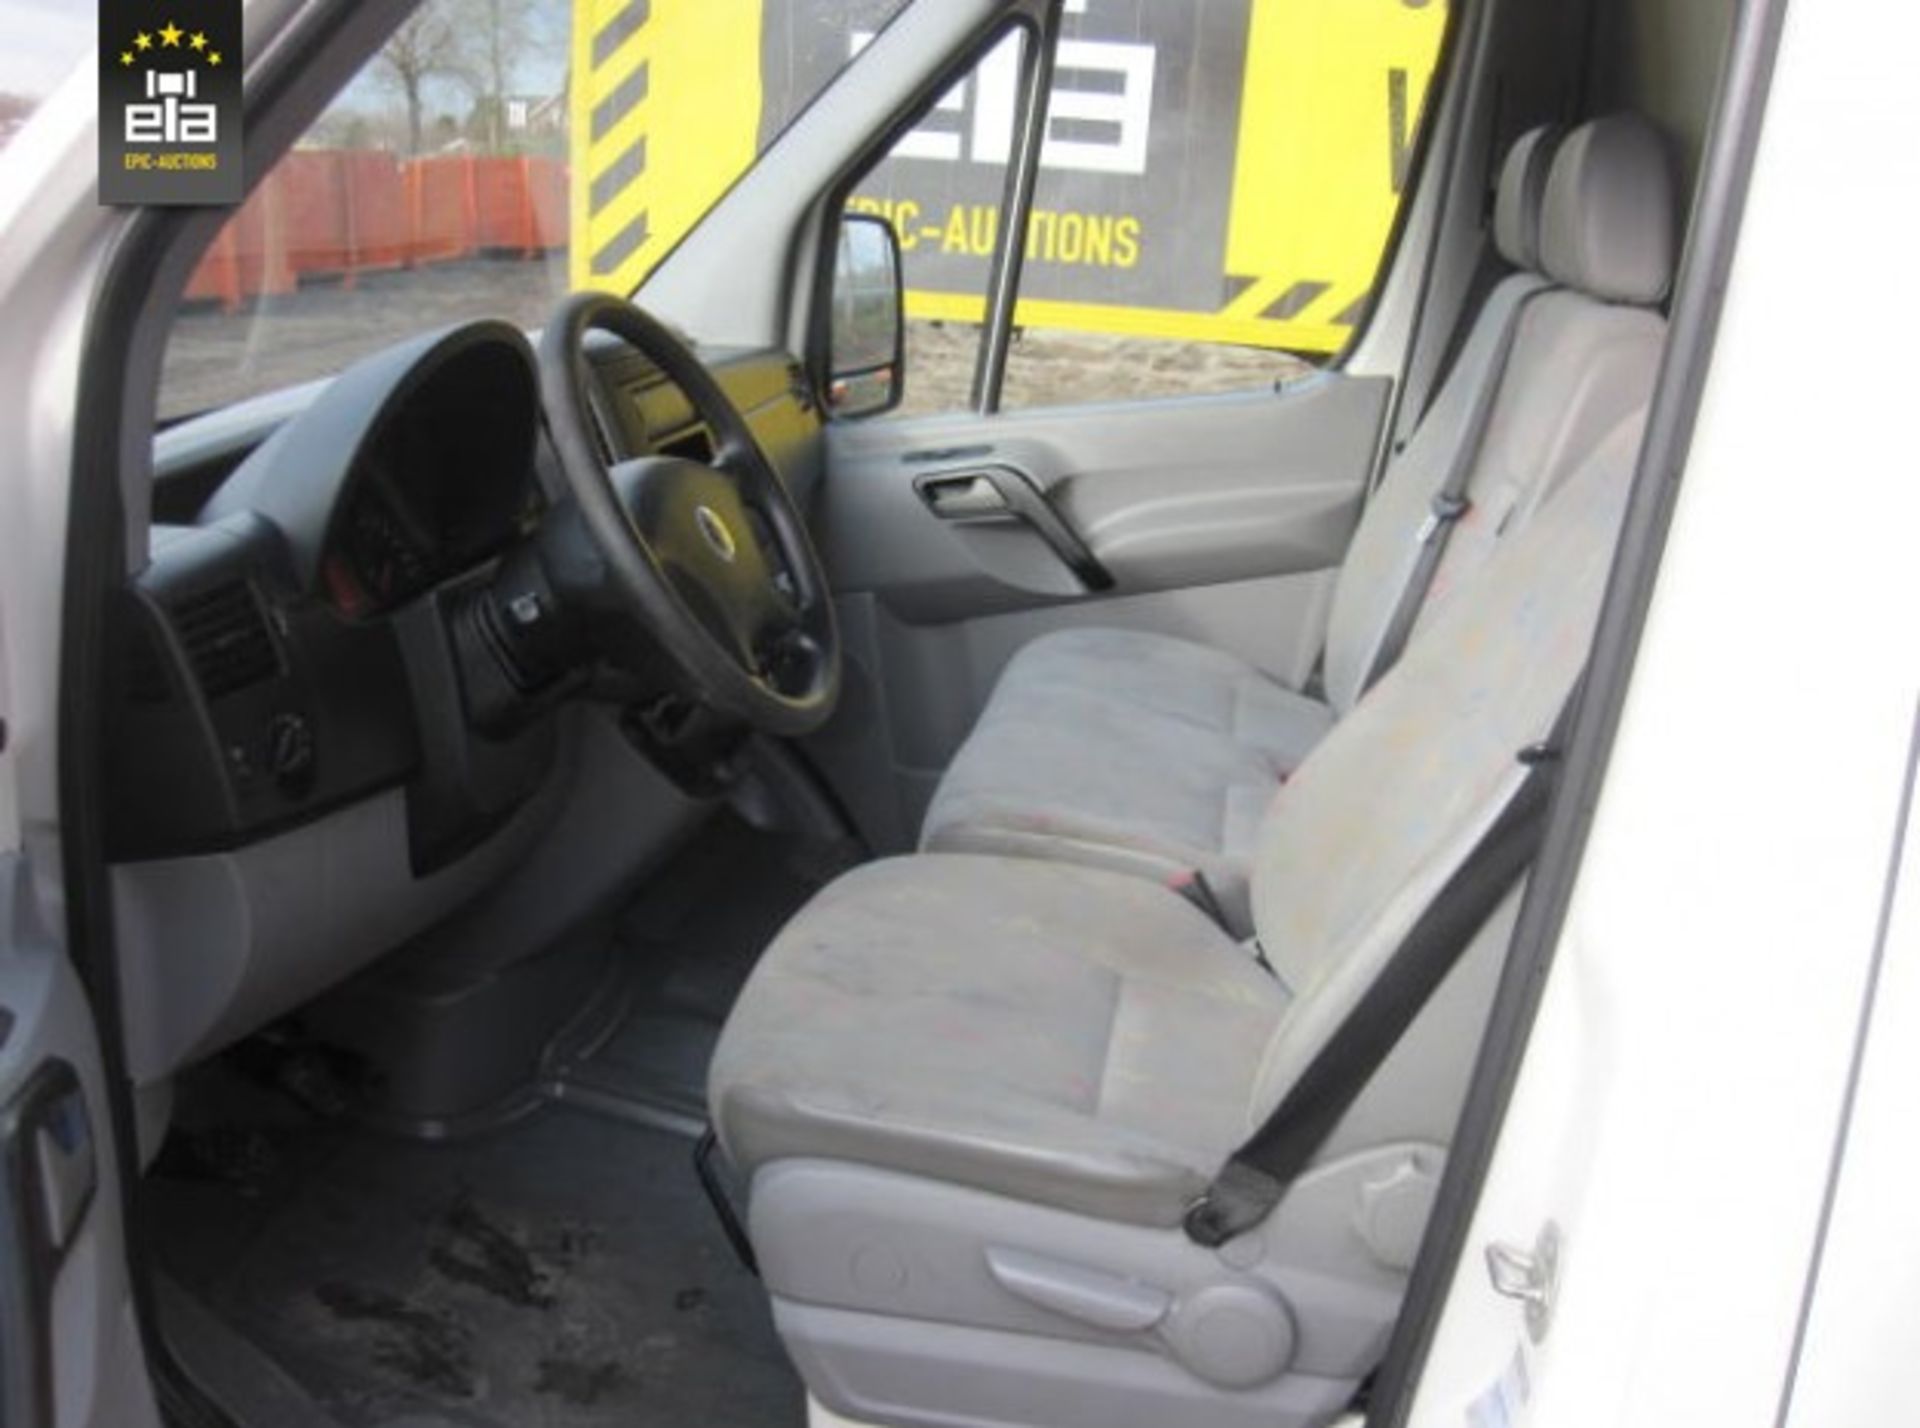 2011 Volkswagen Crafter 2.5 TDI L2H2 20151051 - Image 16 of 26